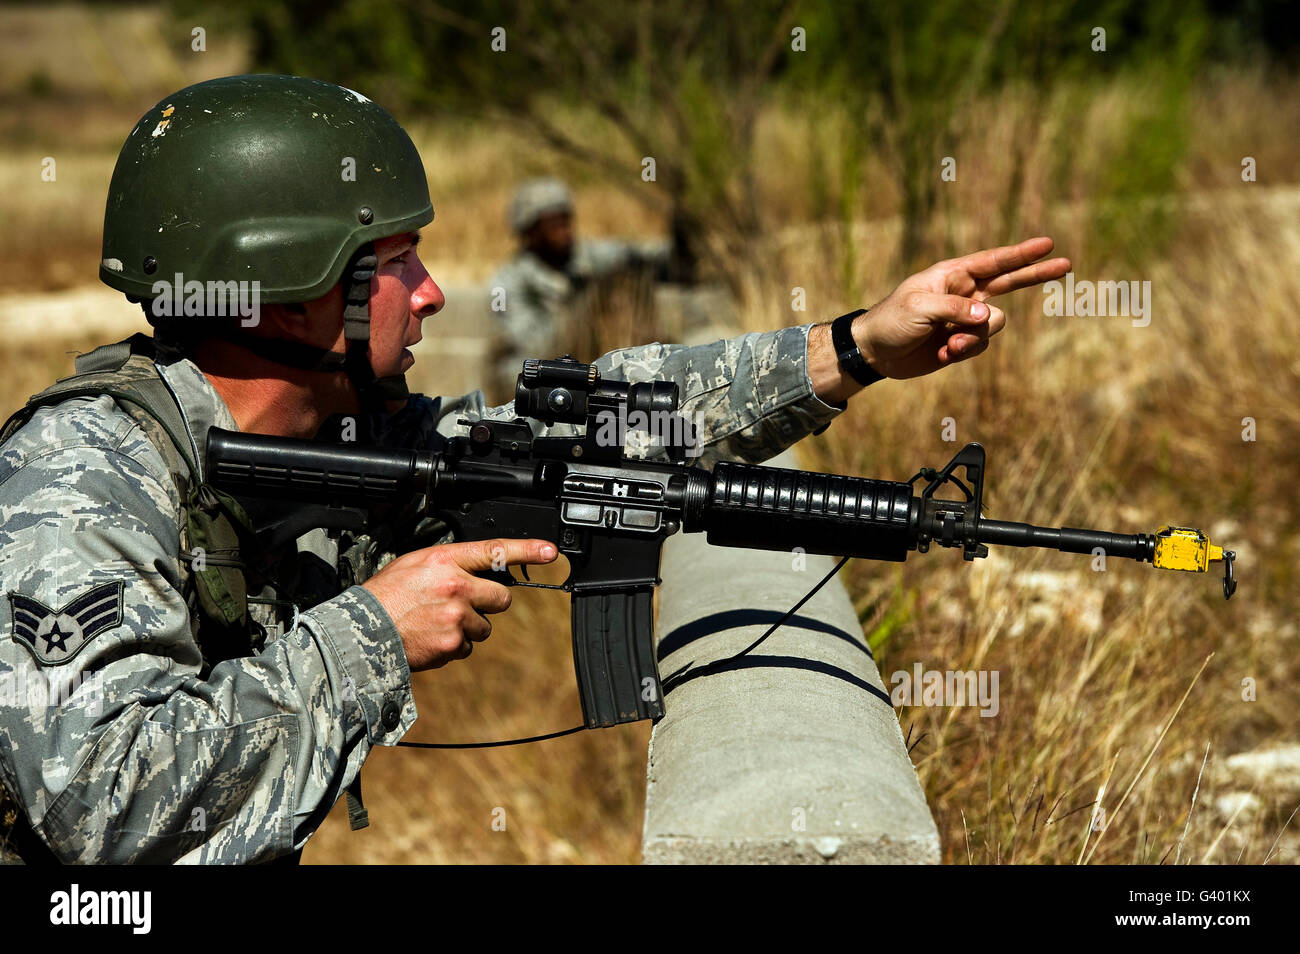 U.S. Air Force Senior Airman provides support during urban operations training. Stock Photo